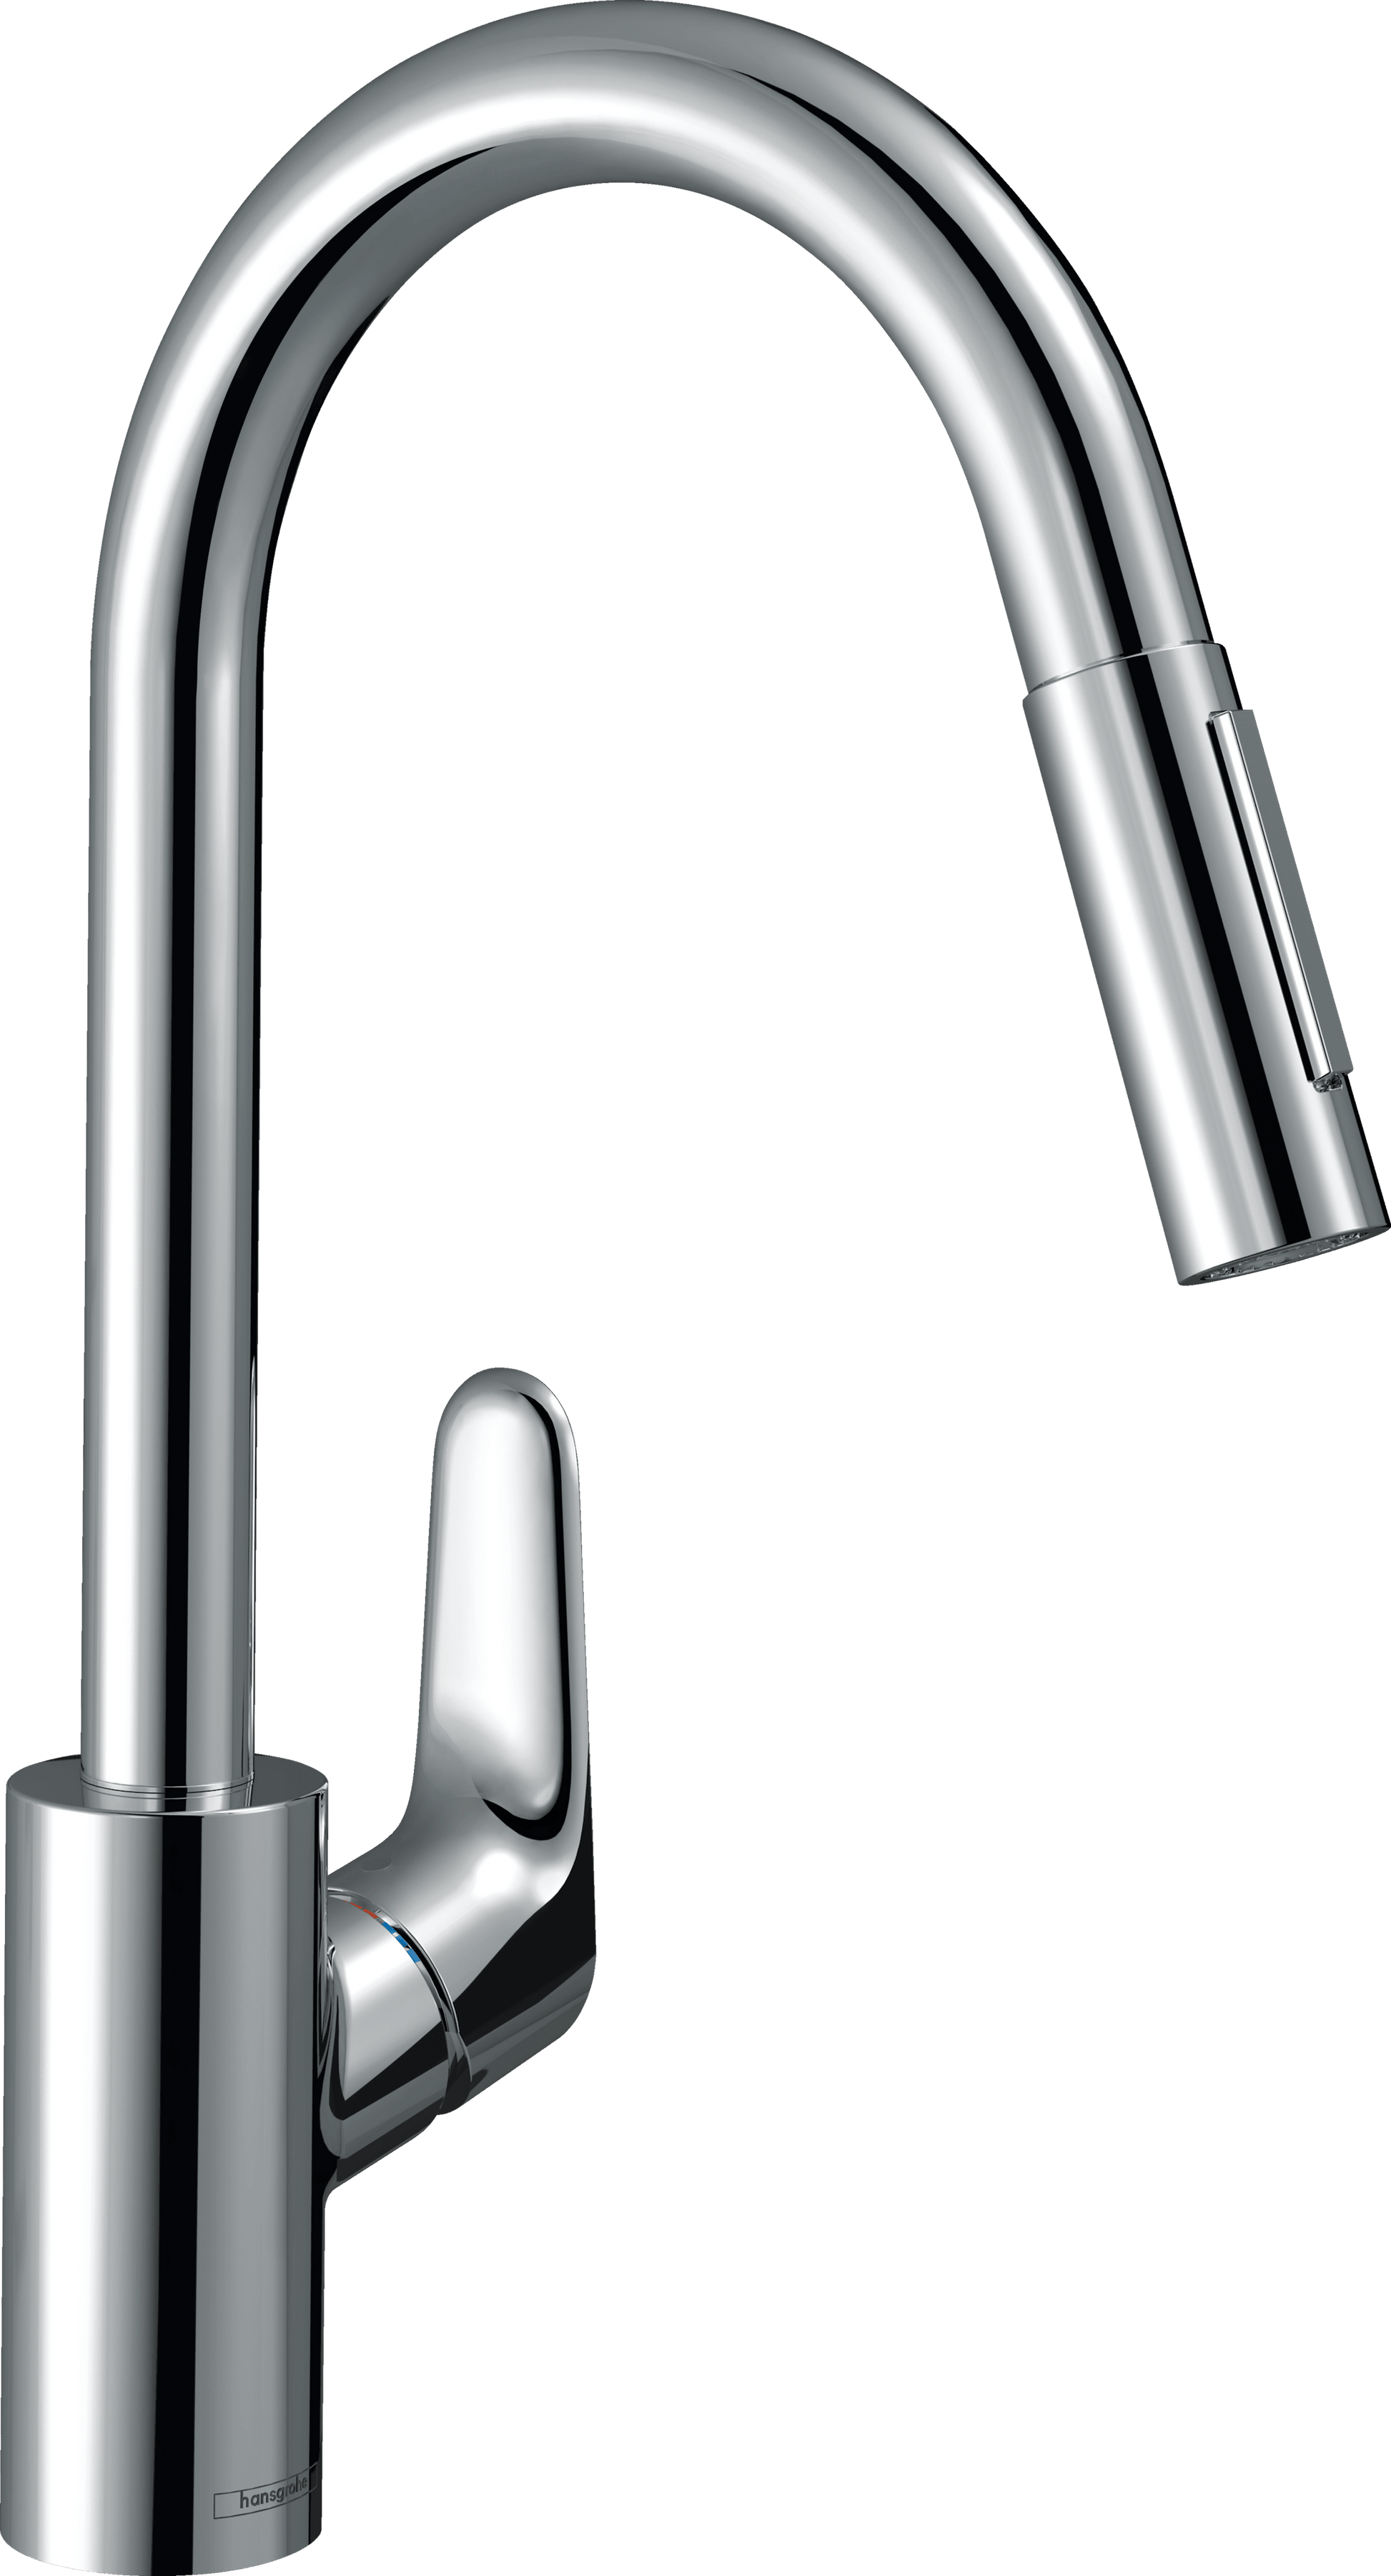 hansgrohe kitchen sink mixer with pull out spray